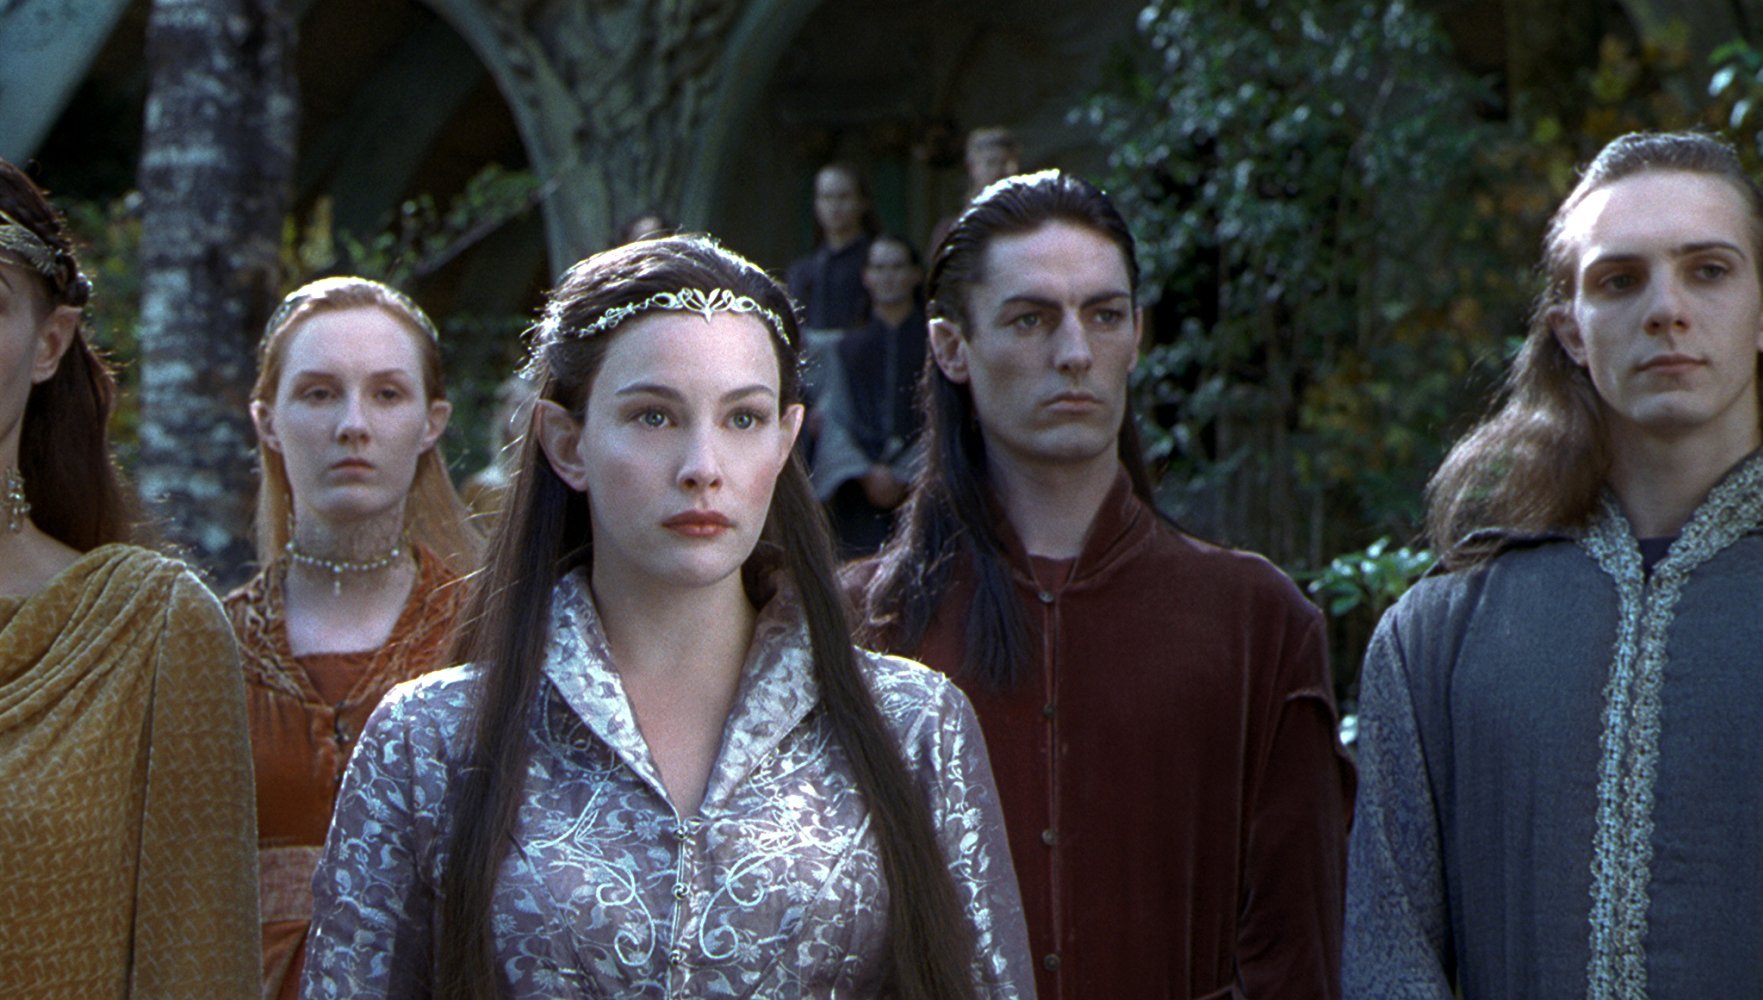 Arwen prepares to flee to the Grey Havens as the war of the ring approaches.